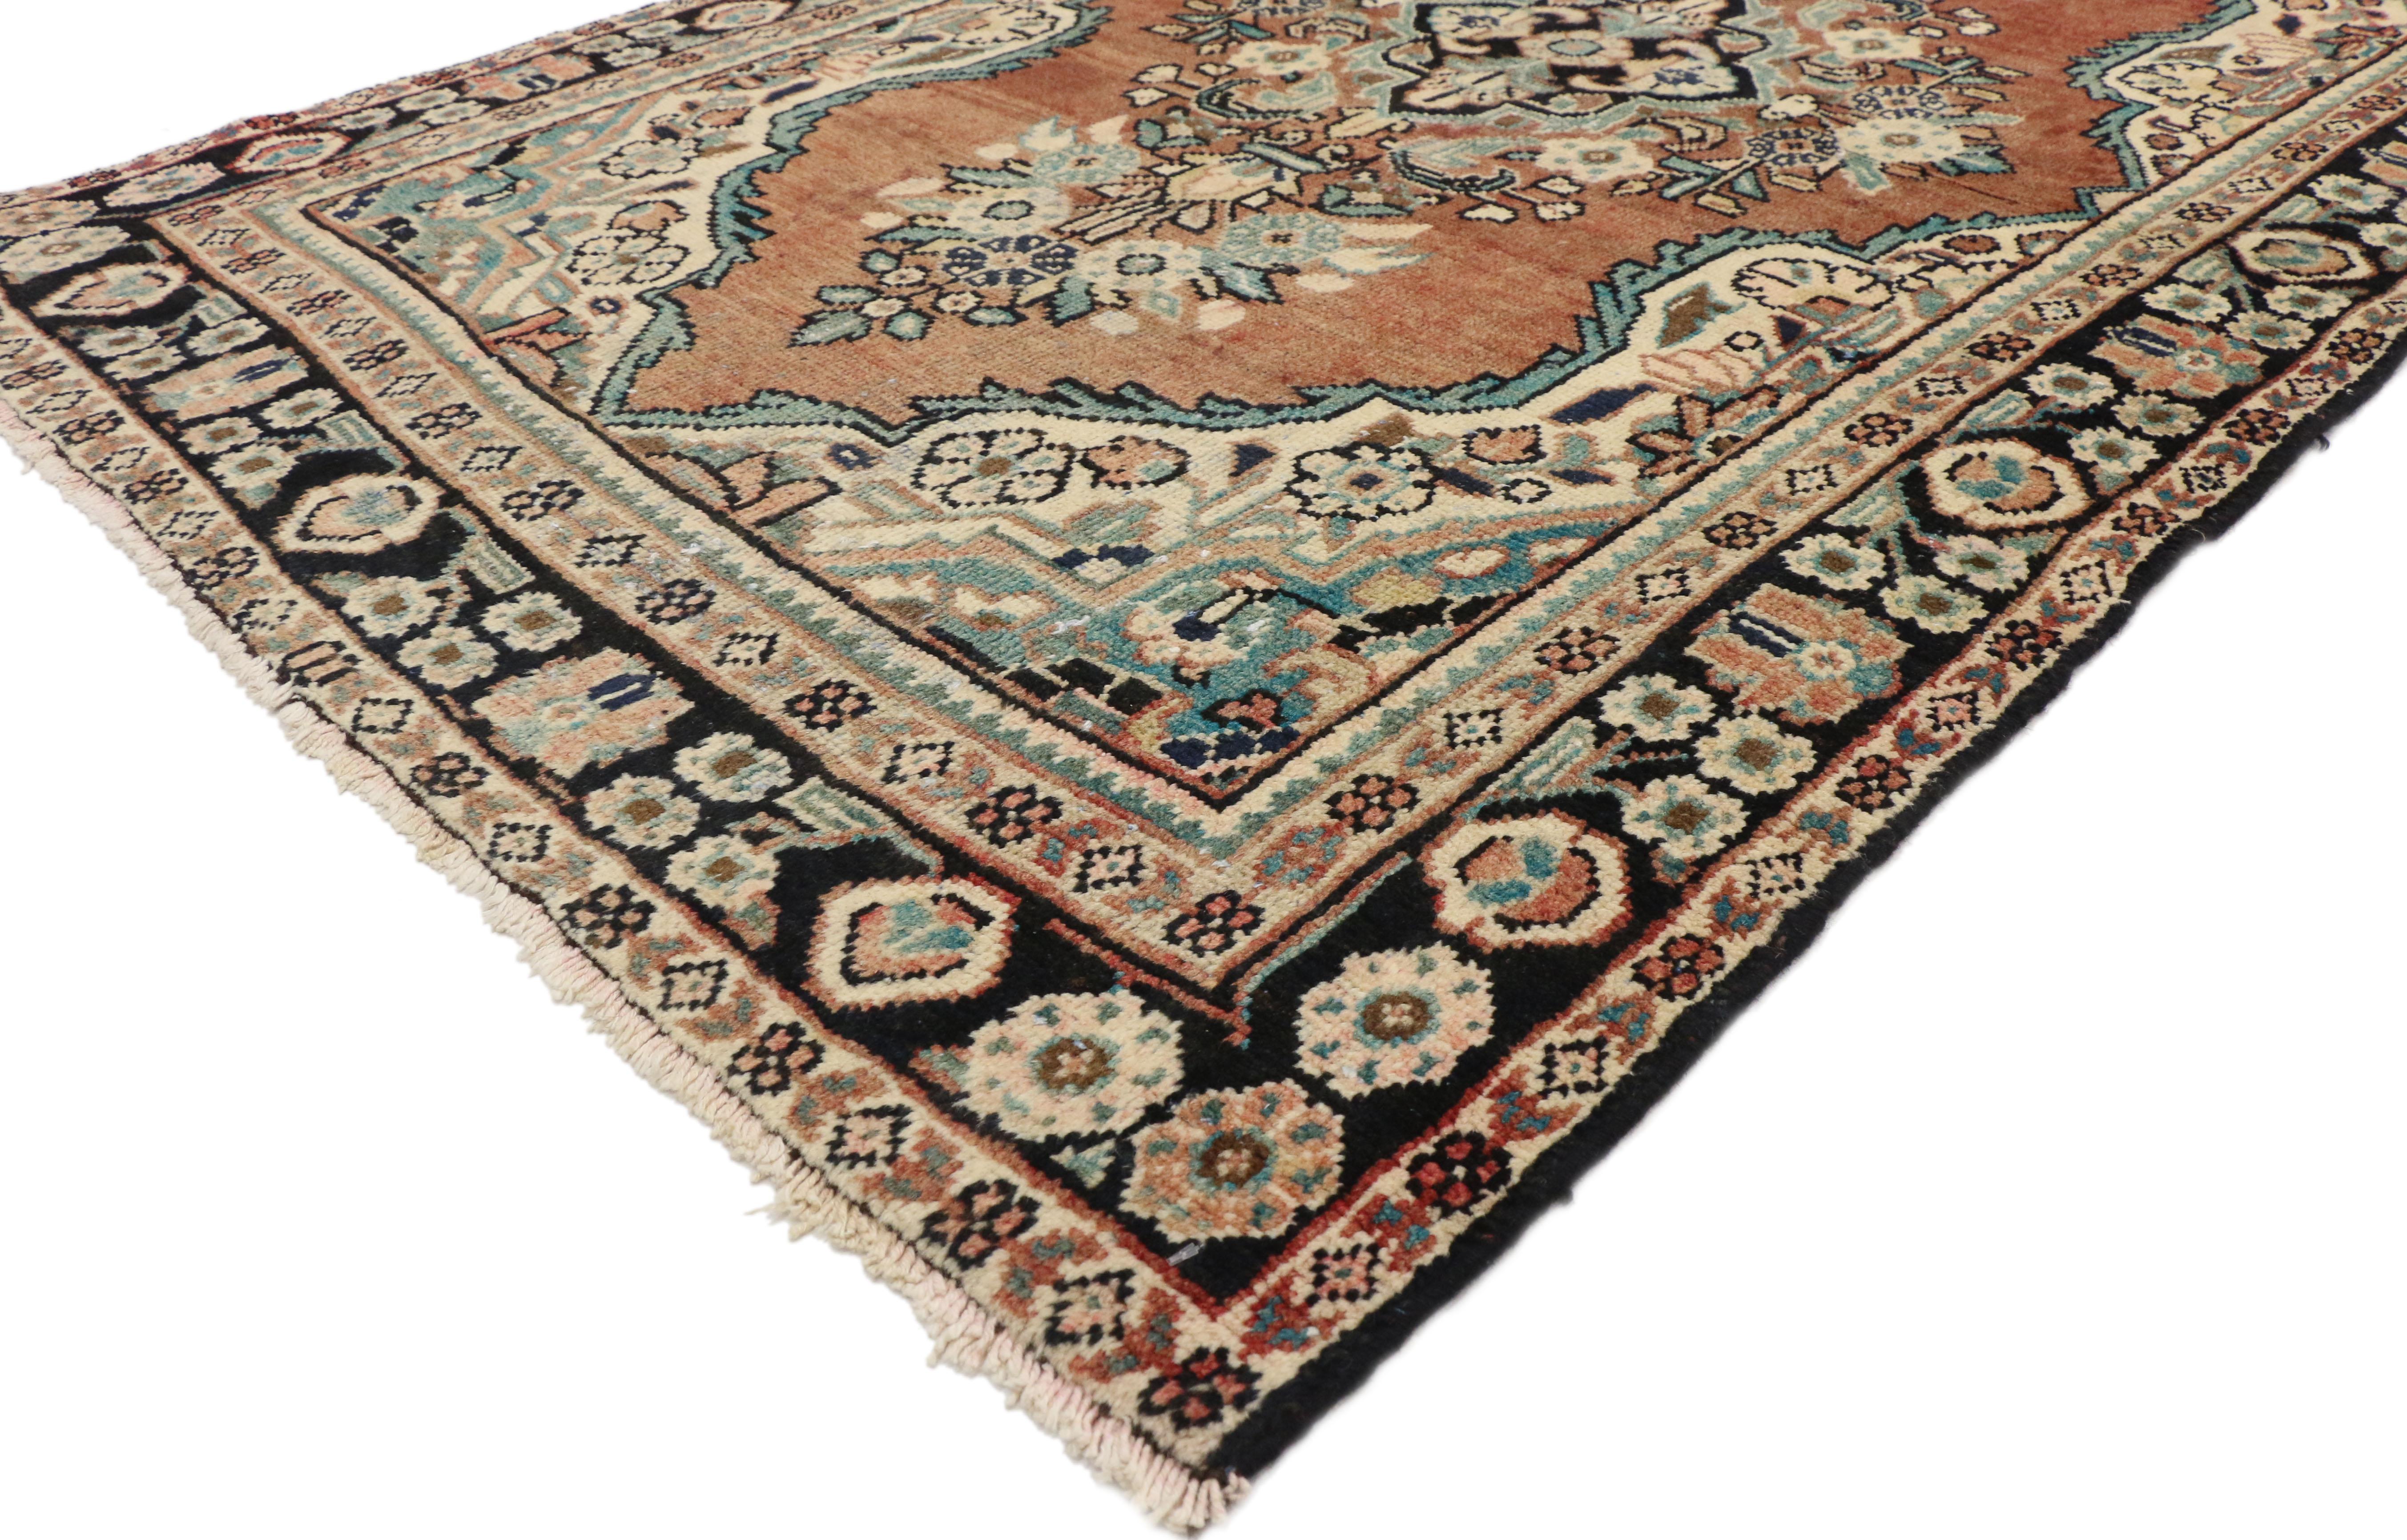 ​75188 Vintage Persian Mahal Rug with Rustic English Country Cottage Style 04'04 x 06'09.Boasting a floral bounty in a range of warm hues, this vintage Persian Mahal rug is a delightful example of English Country Cottage style. ​Taking center stage